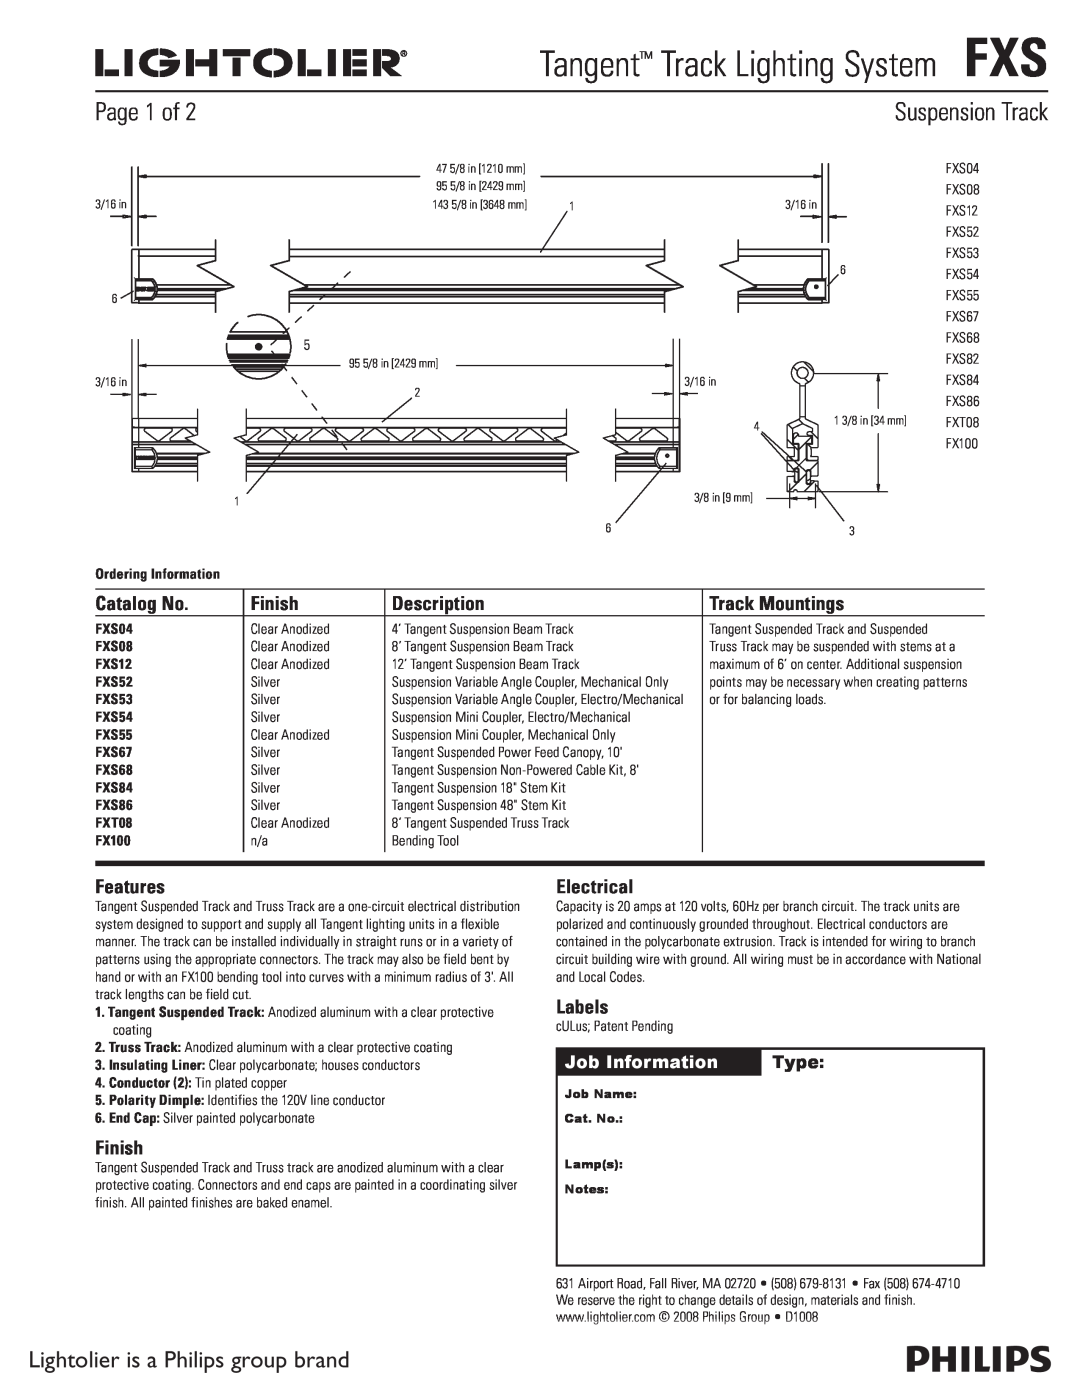 Lightolier manual Tangent Track Lighting SystemFXS, Page 1 of, Lightolier is a Philips group brand, Catalog No, Finish 